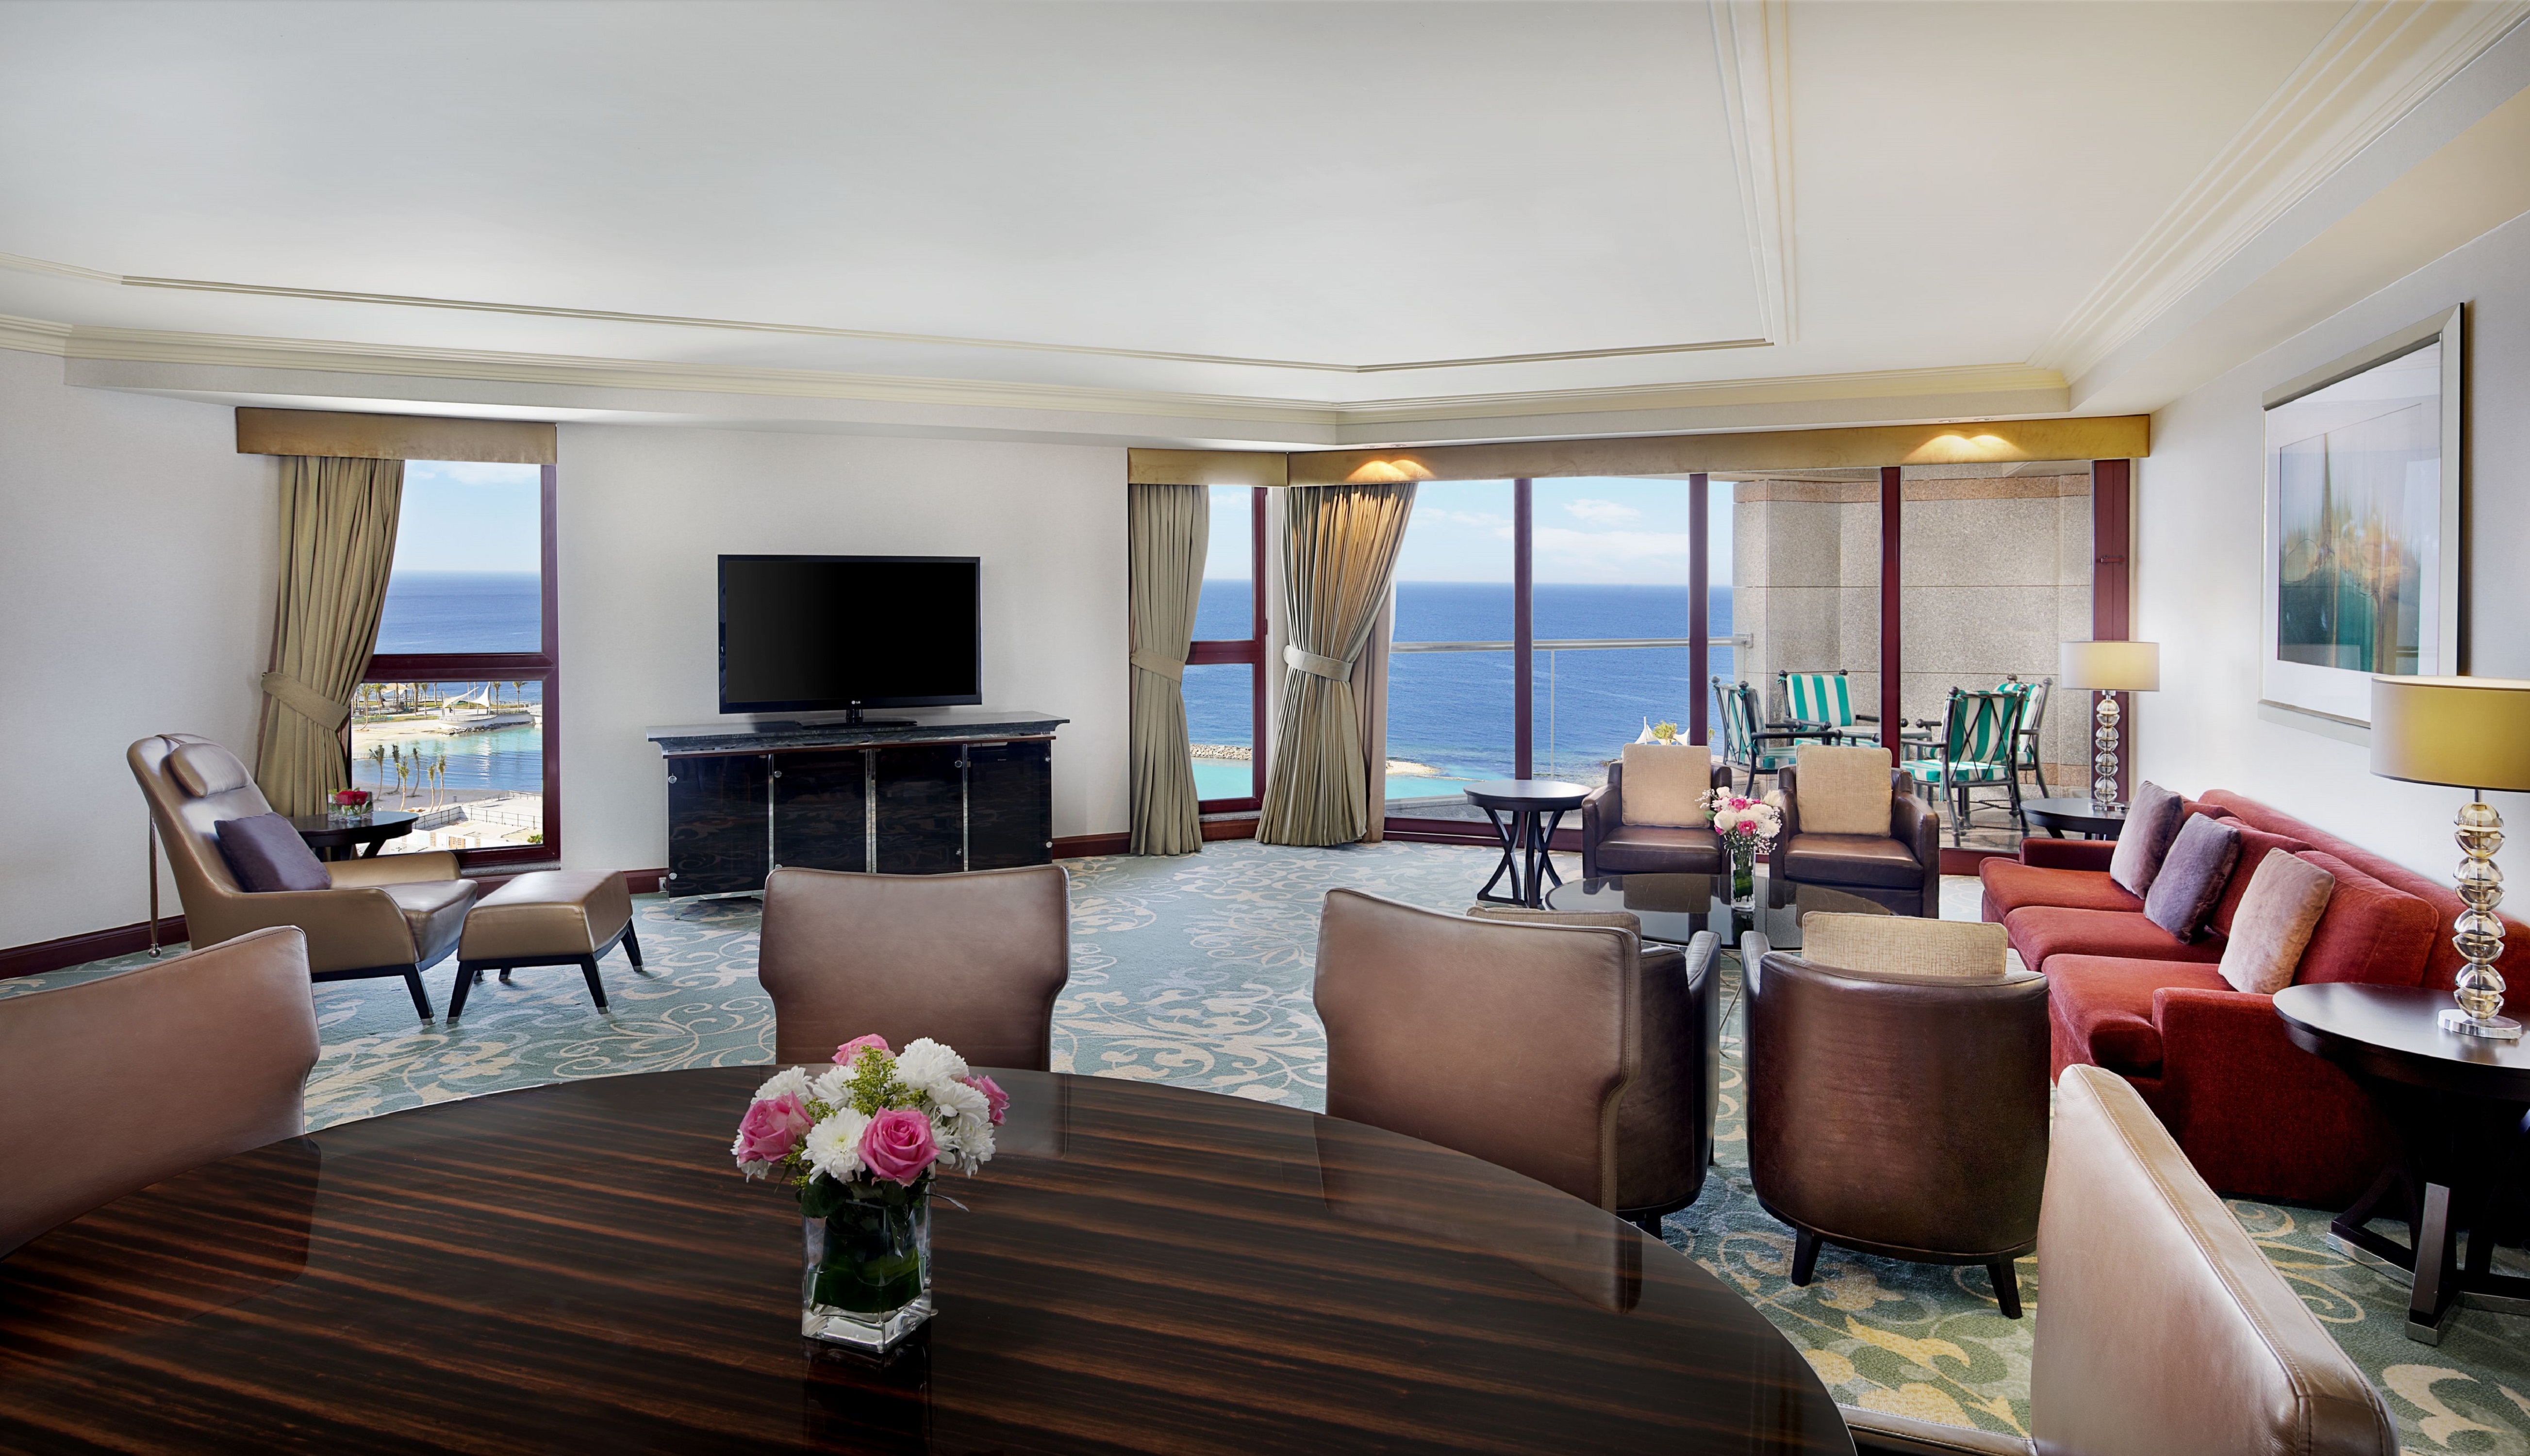 Living Area of Al Amiri Suite, with Lots of Space and Sea Views